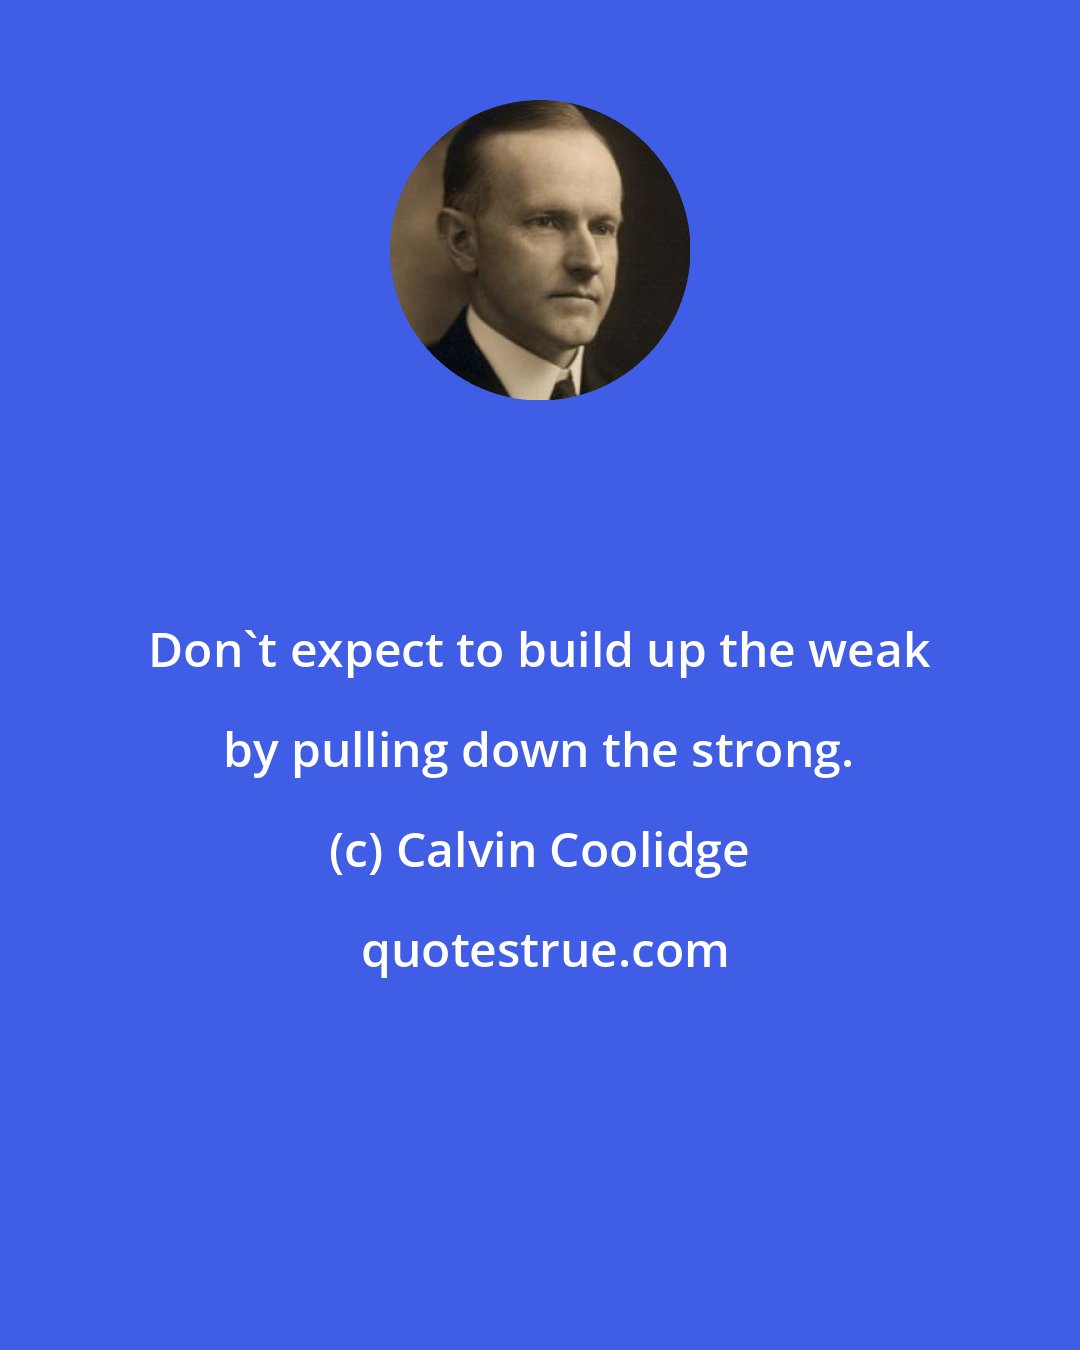 Calvin Coolidge: Don't expect to build up the weak by pulling down the strong.